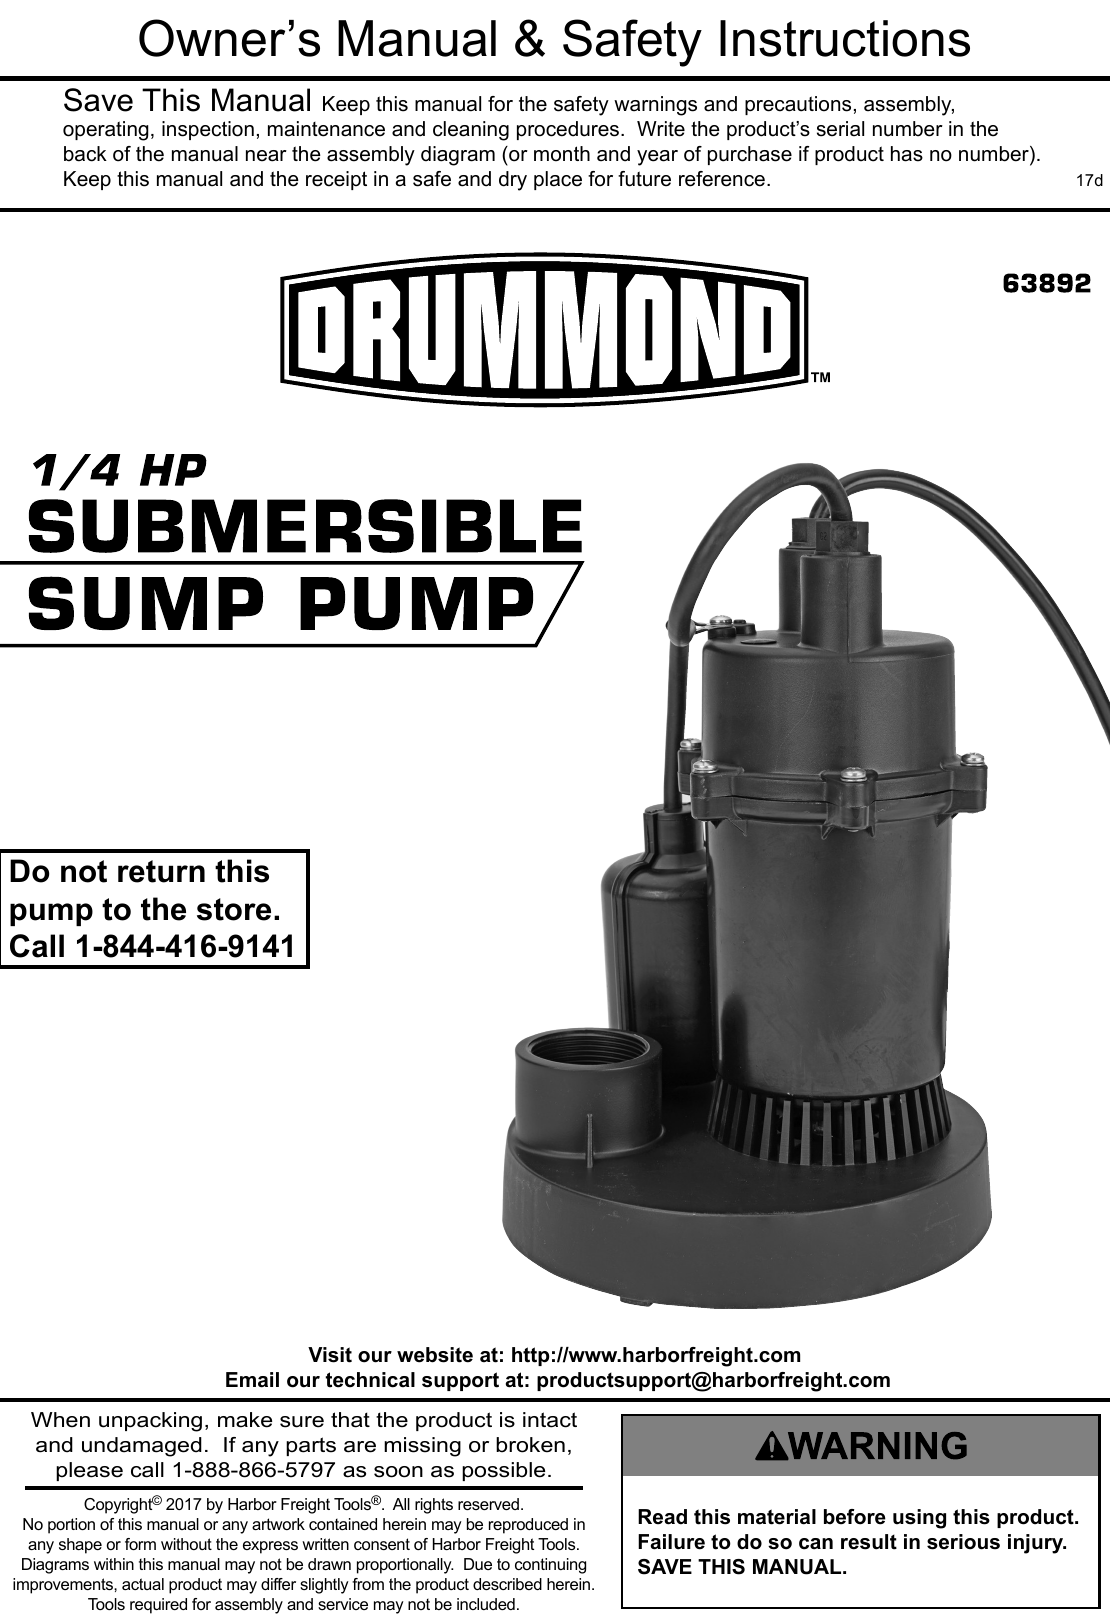 Page 1 of 8 - Manual For The 63892 1/4 HP Submersible Sump Pump 3000 GPH